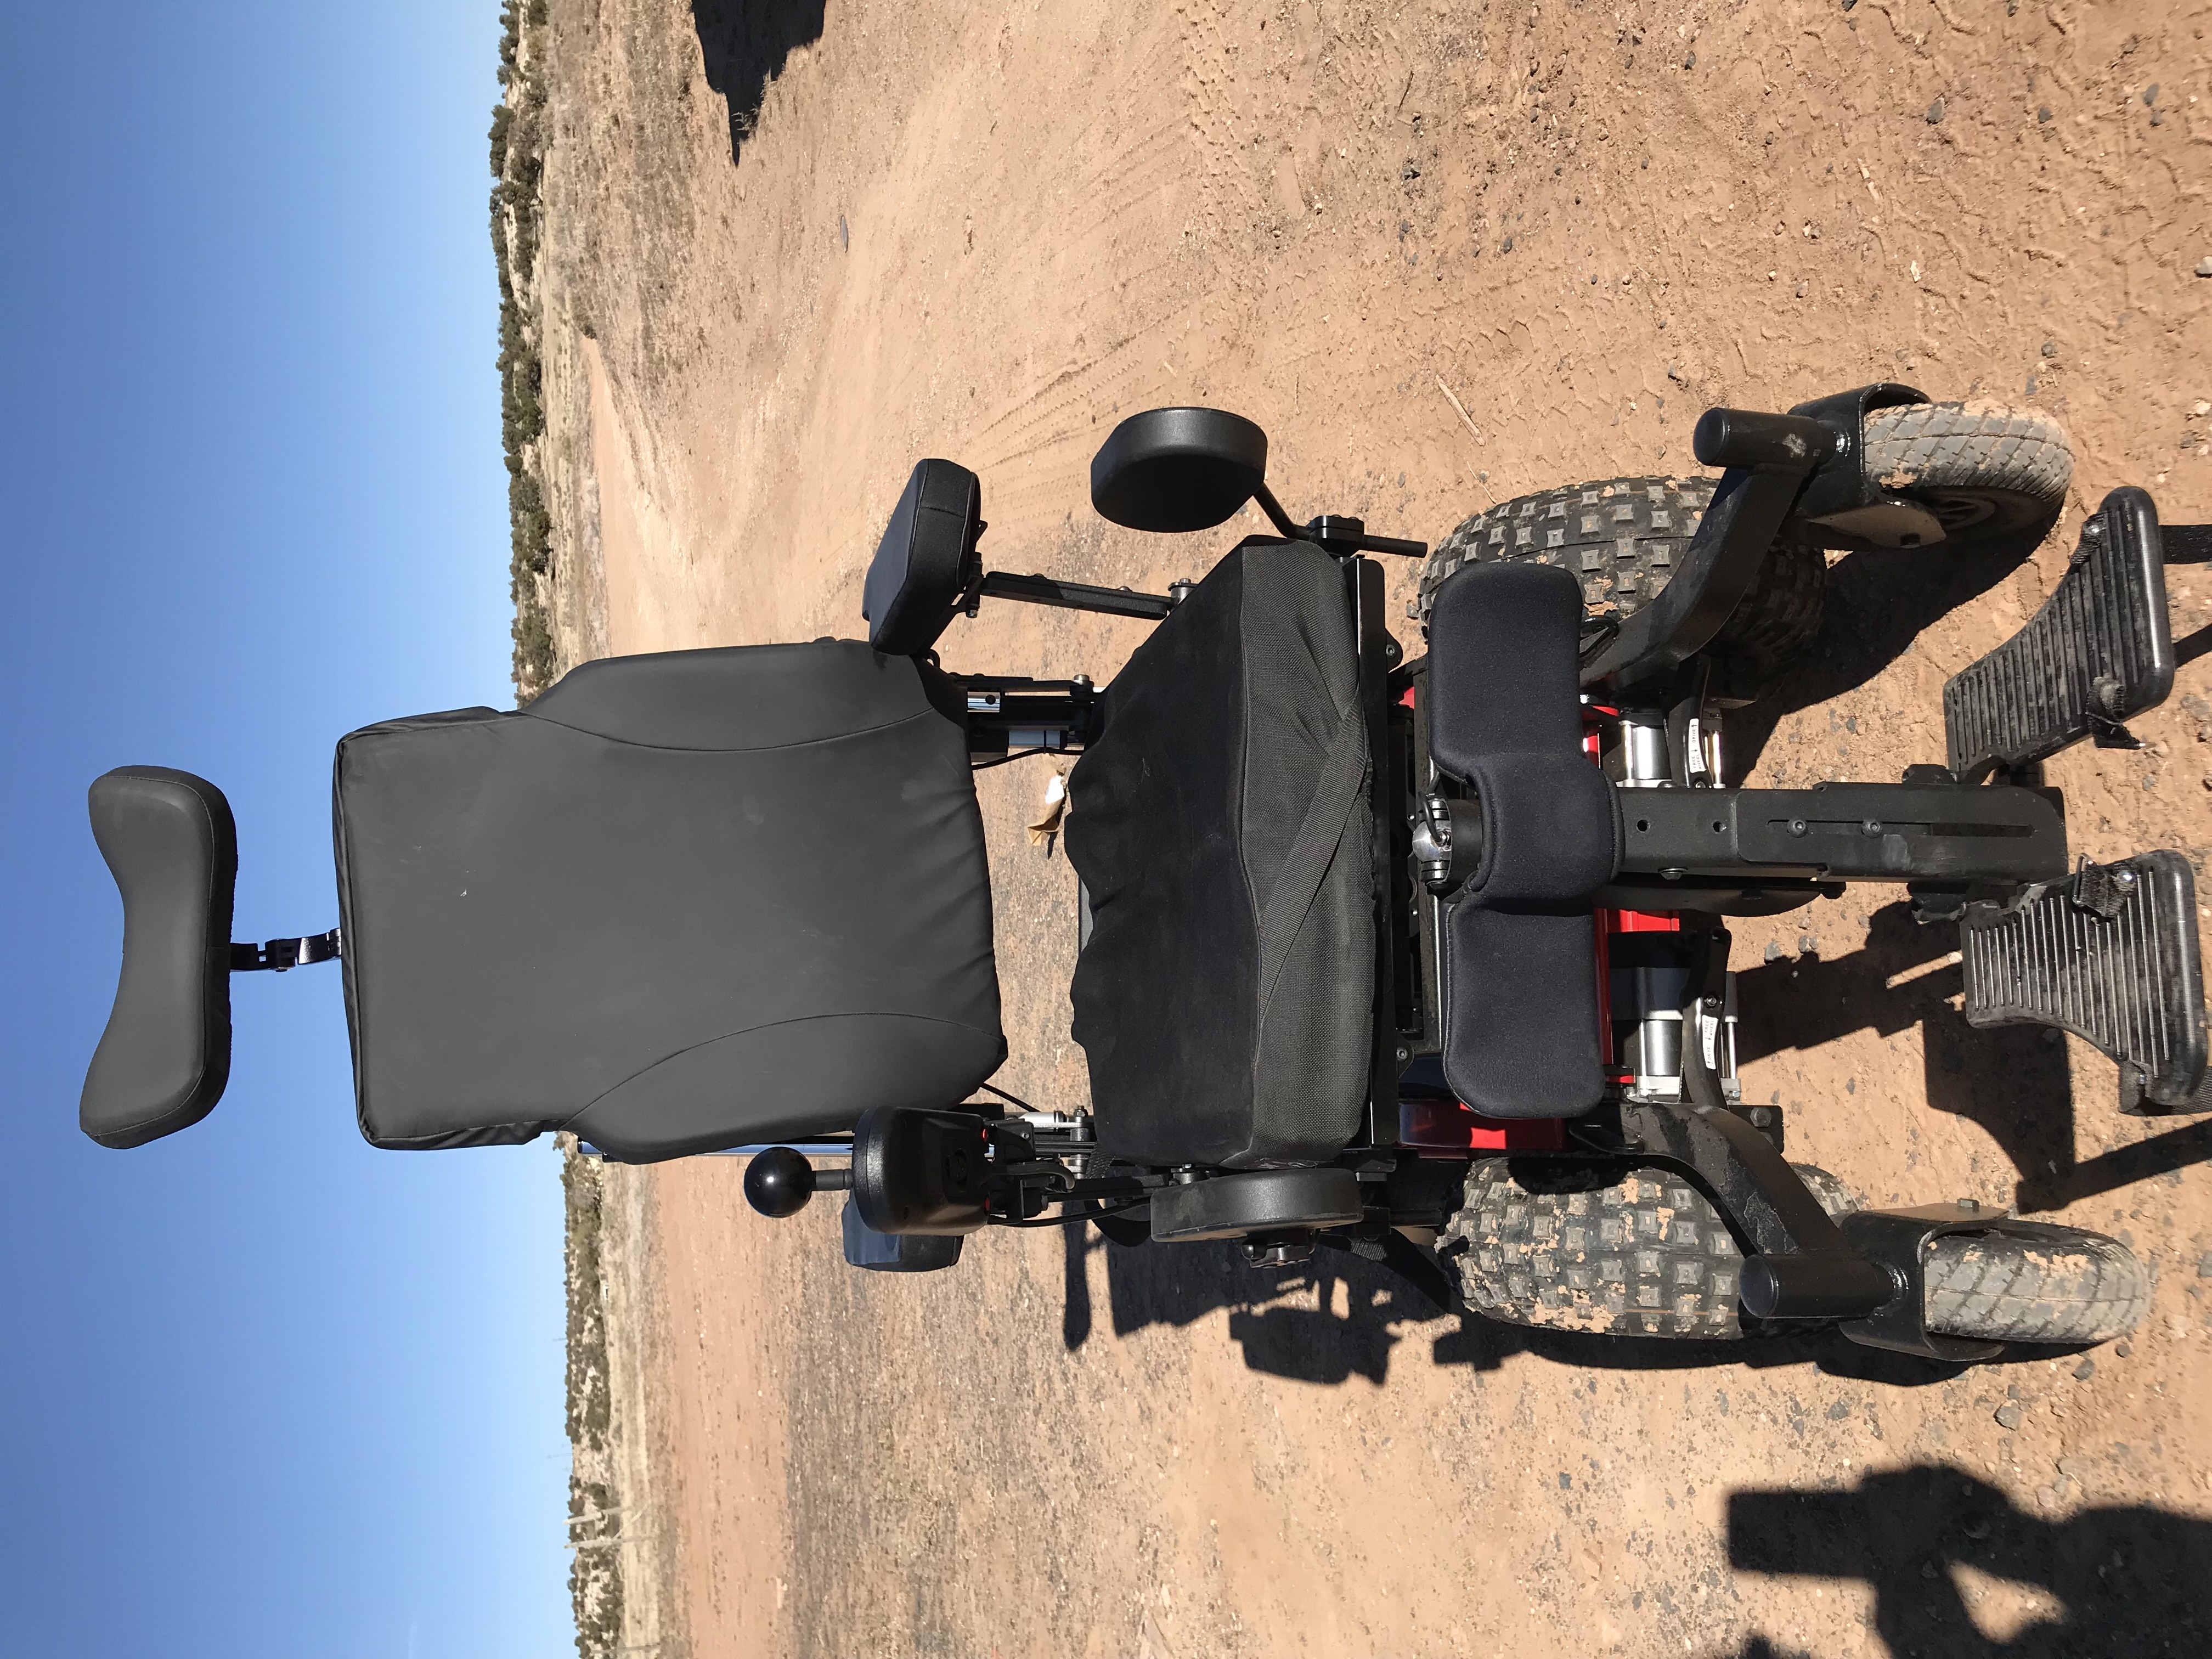 V6 Frontier Off Road Powerchair - Buy & Sell Used Electric Wheelchairs, Mobility ...4032 x 3024